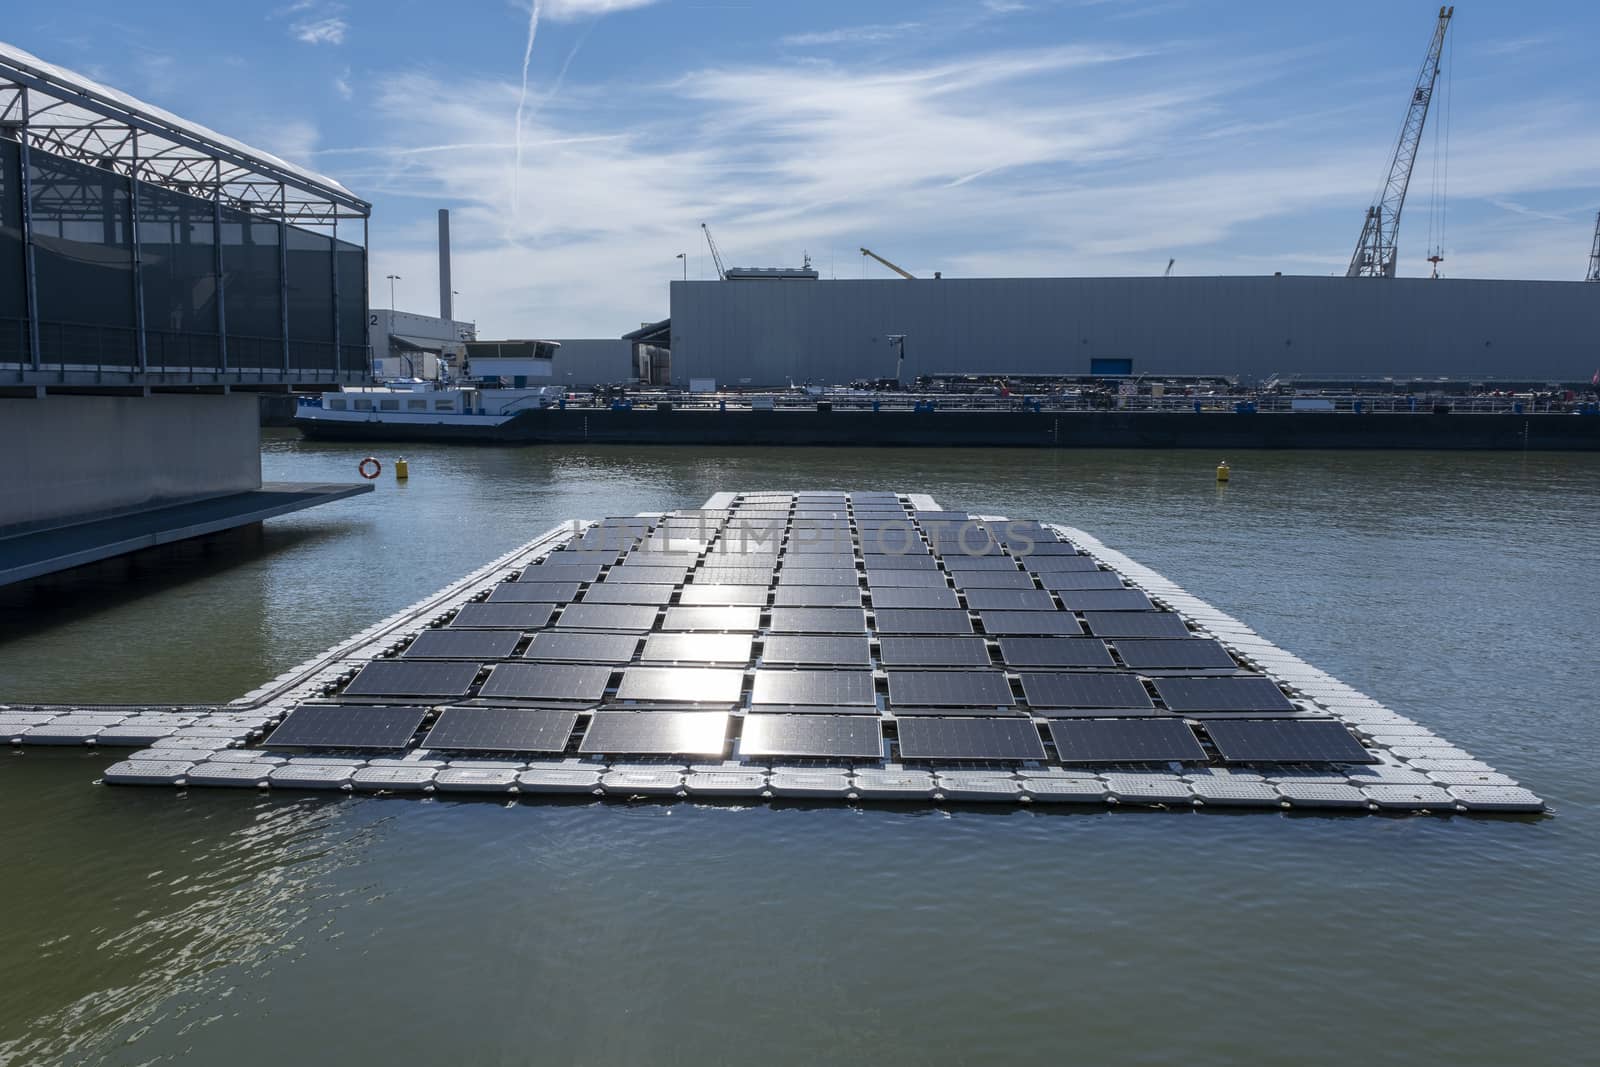 solar panel Floating on the water. Used to produce electricity in a clean technology concept.